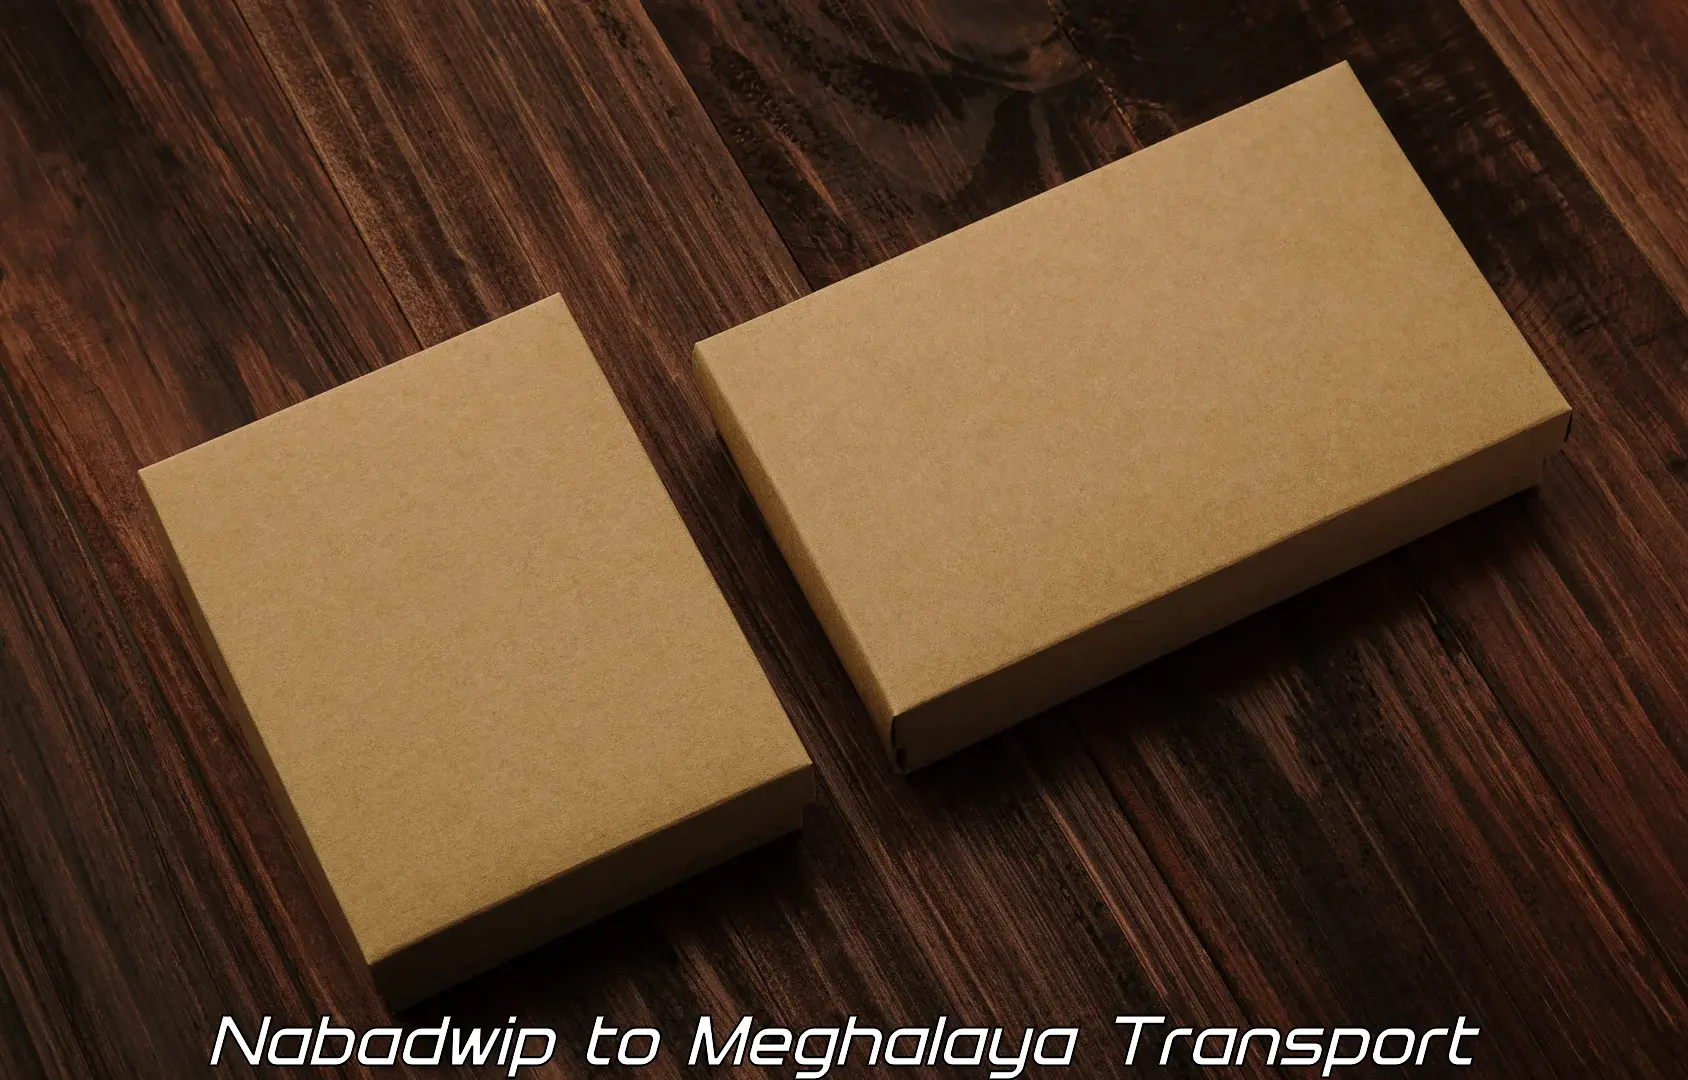 Nationwide transport services Nabadwip to Jowai